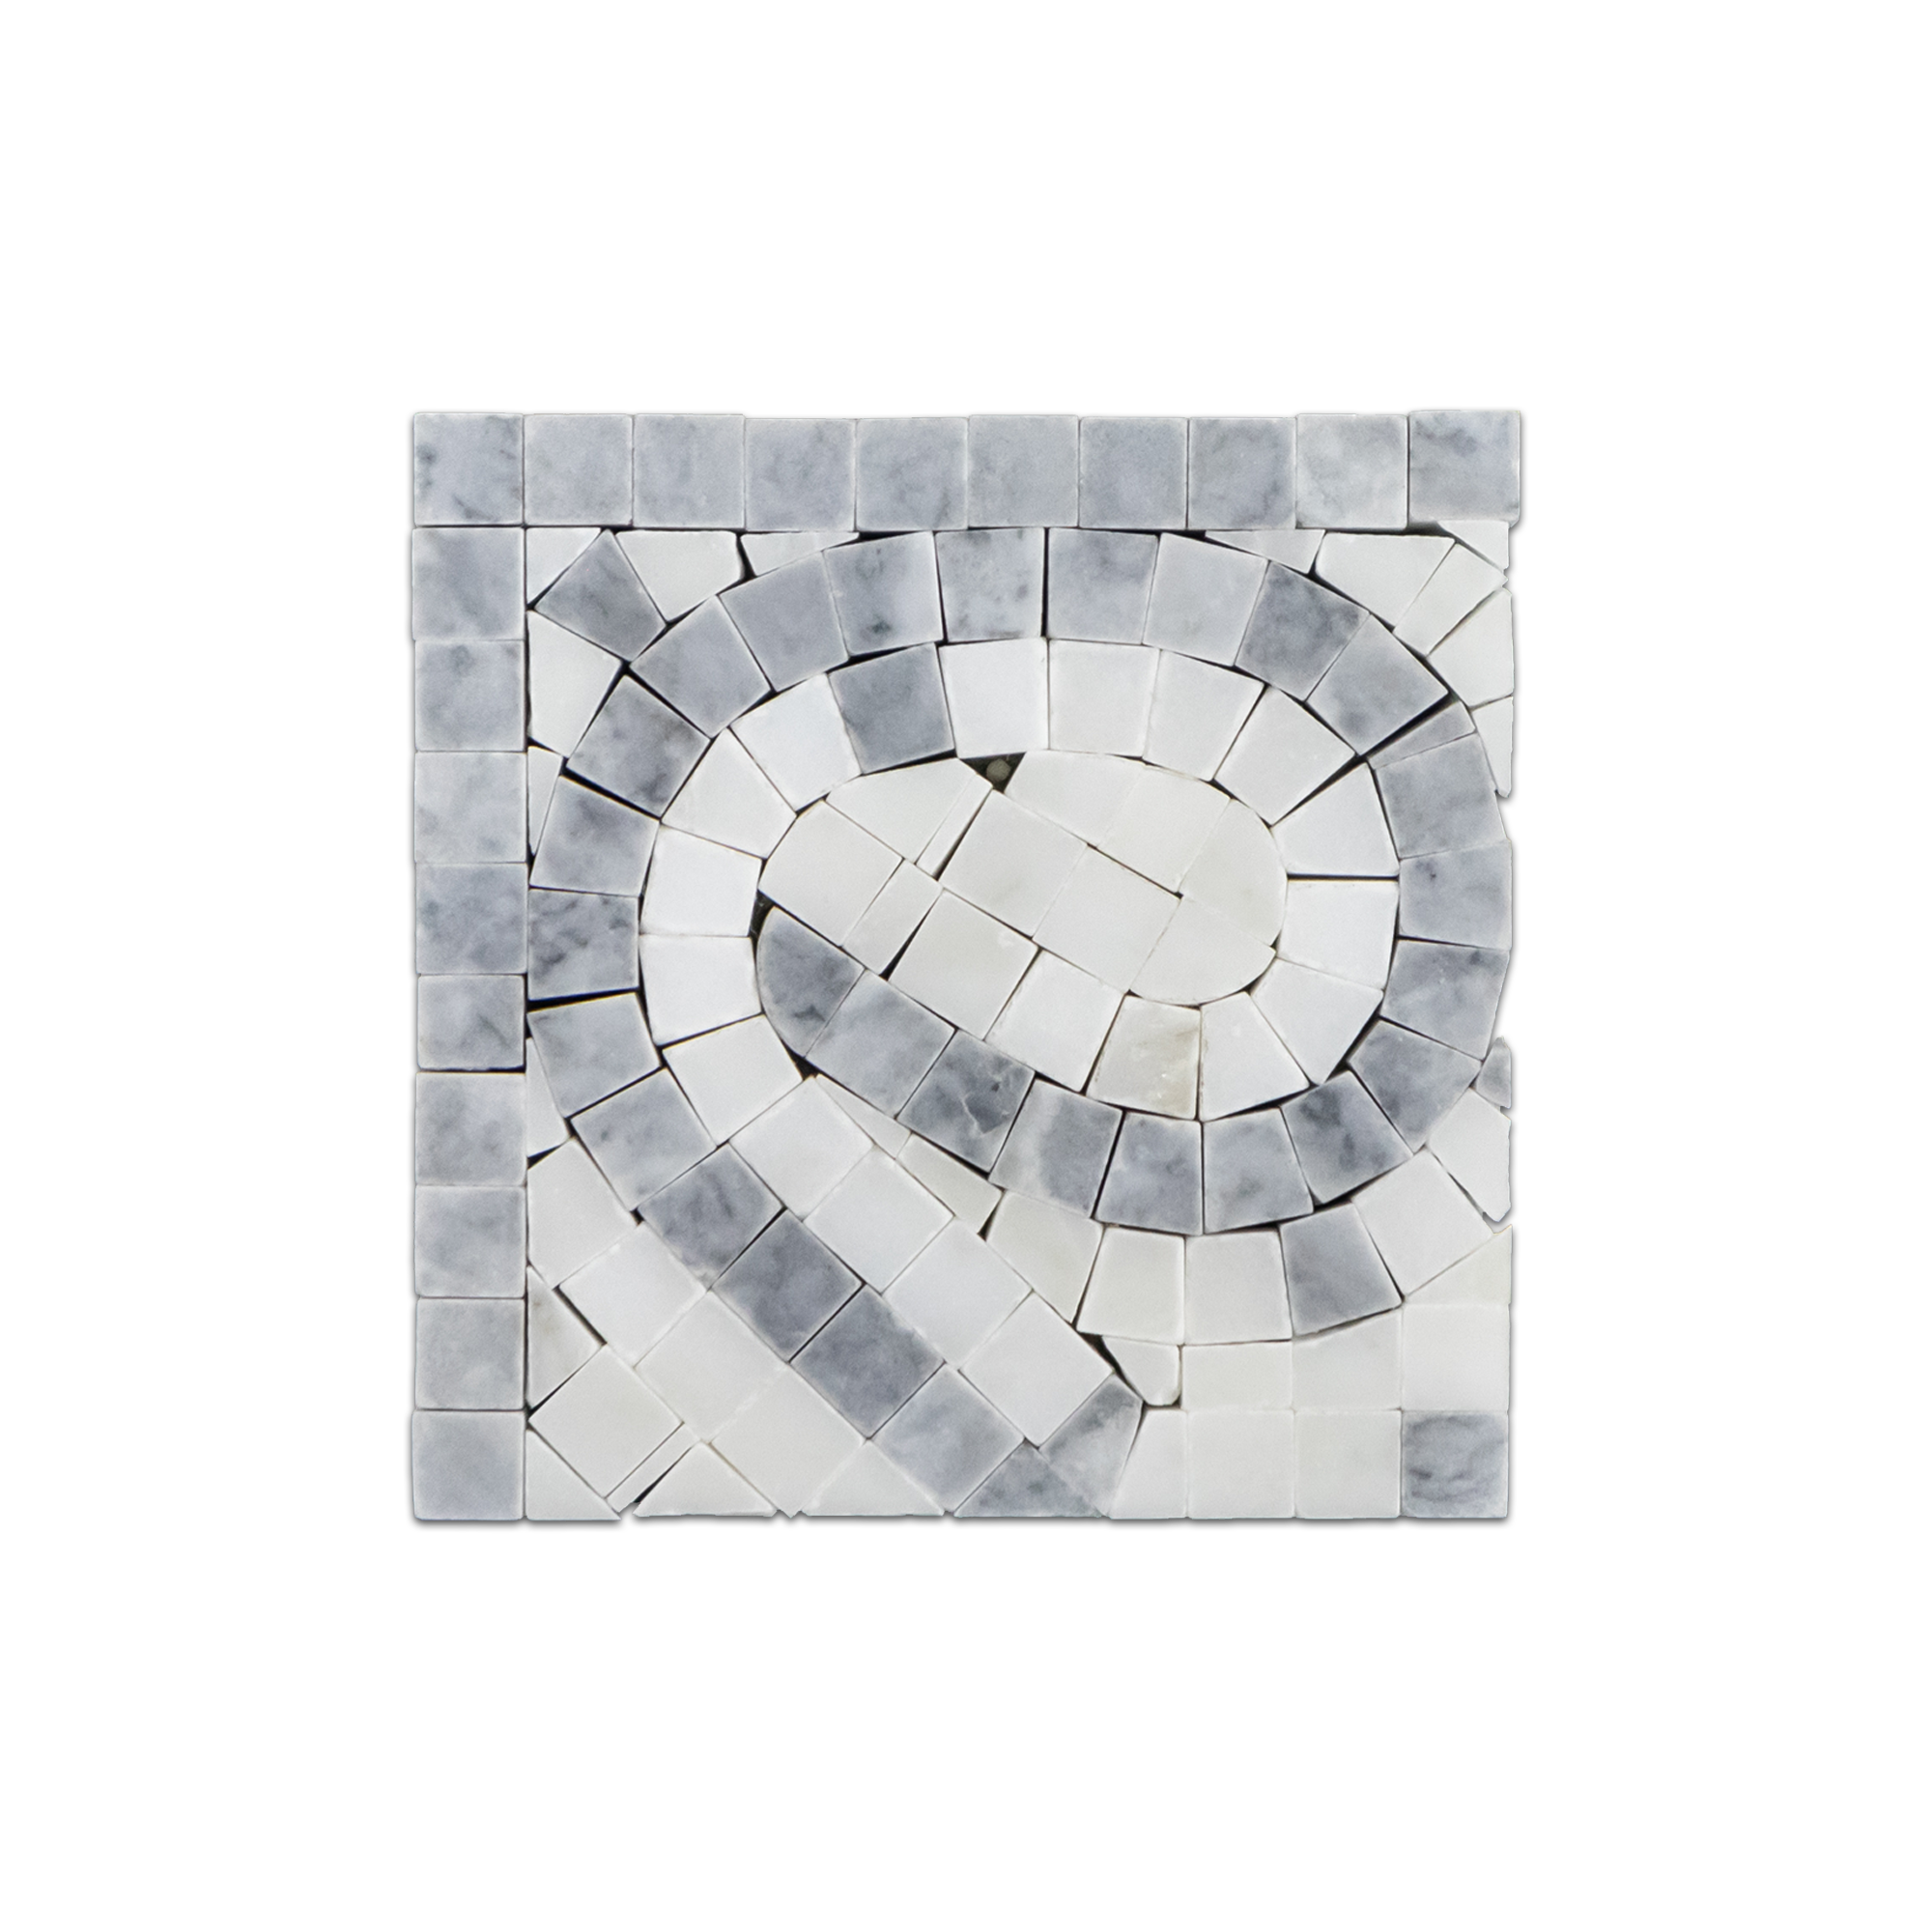 Elon Pacific Gray Pearl White Marble Wave Border Corner Mosaic 4x12x0.375 Honed AM1004H C Surface Group International Product